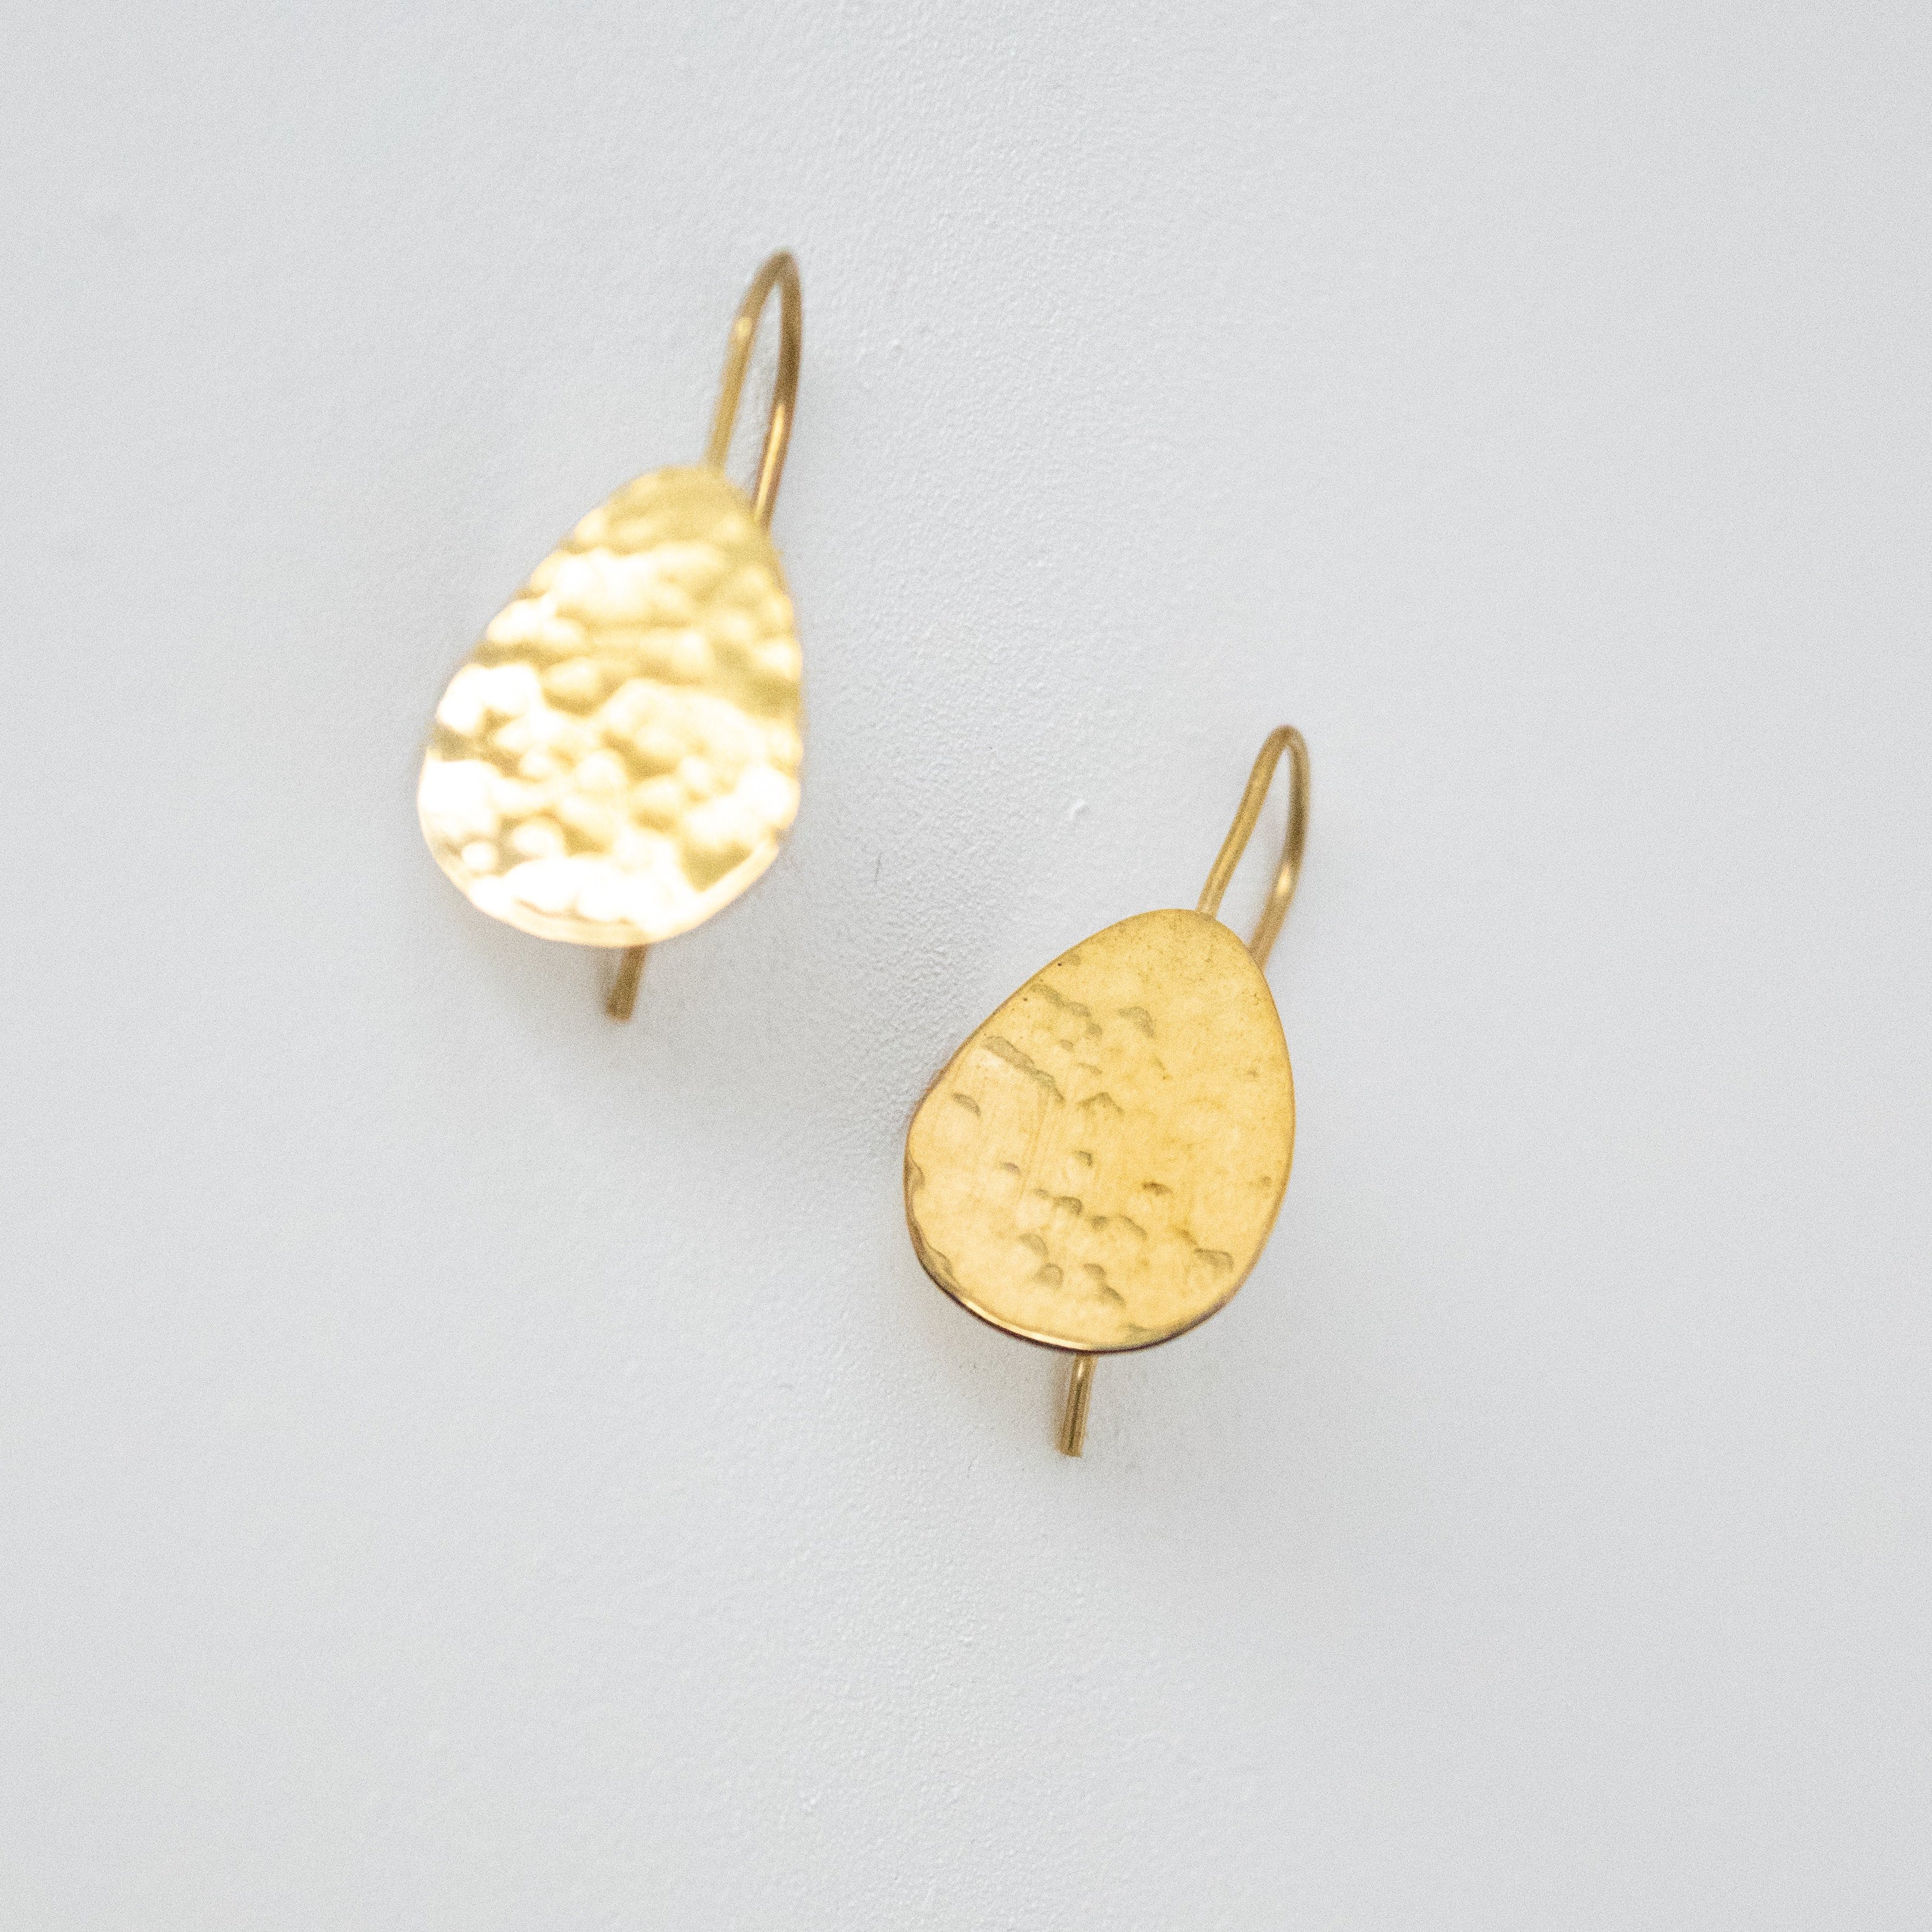 Dewdrop Earrings - Kenyan materials and design for a fair trade boutique